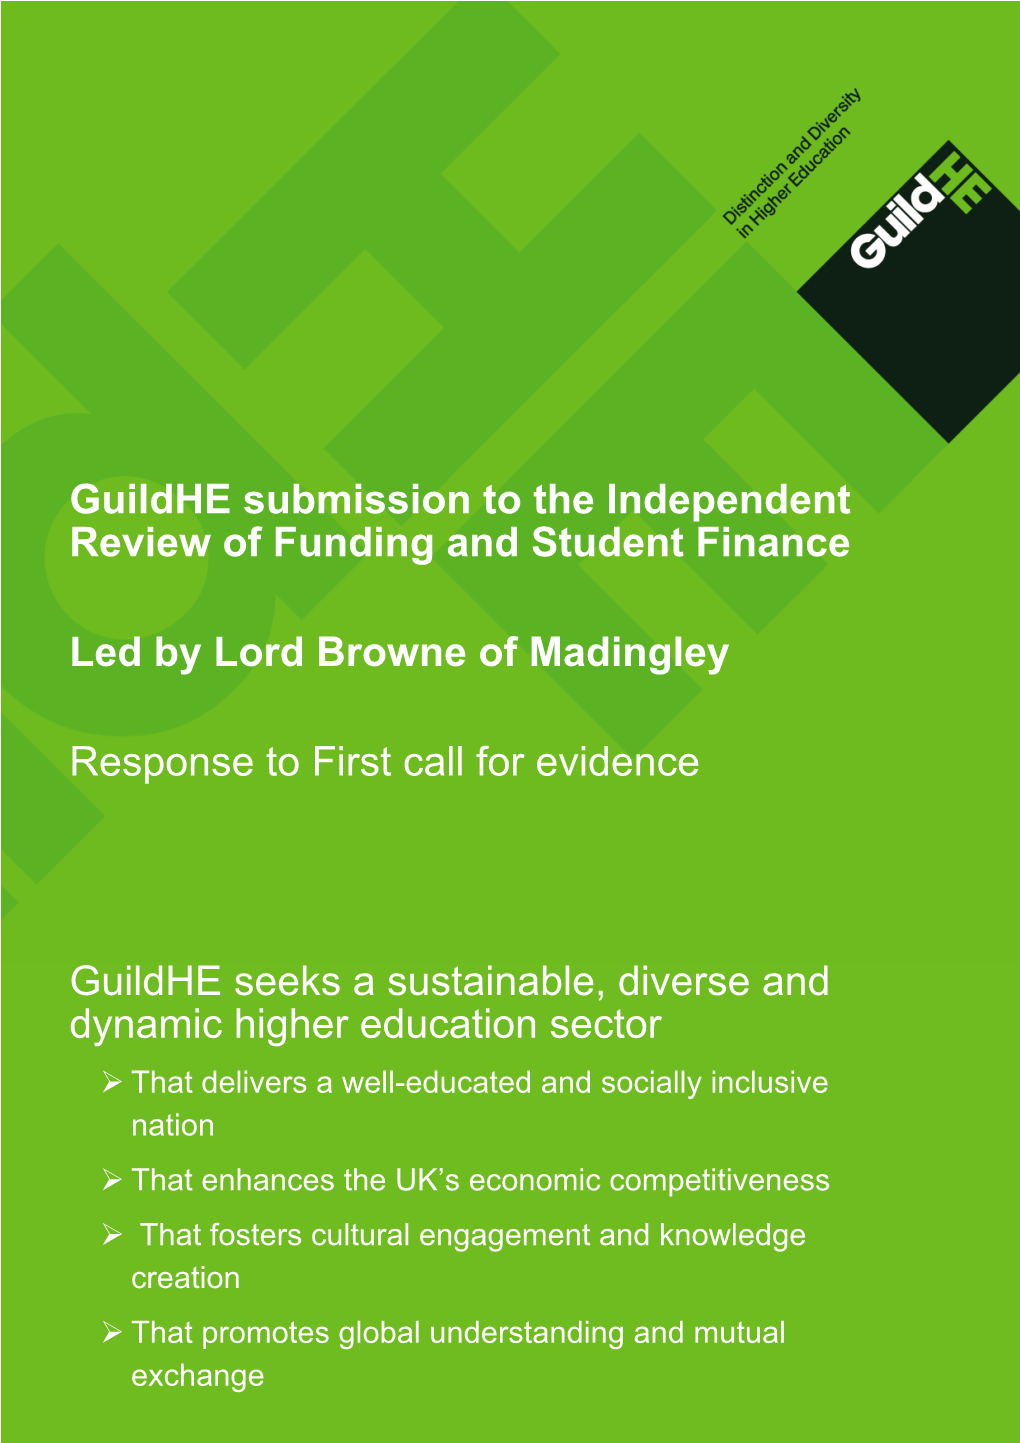 Guildhe Submission to the Independent Review of Funding and Student Finance